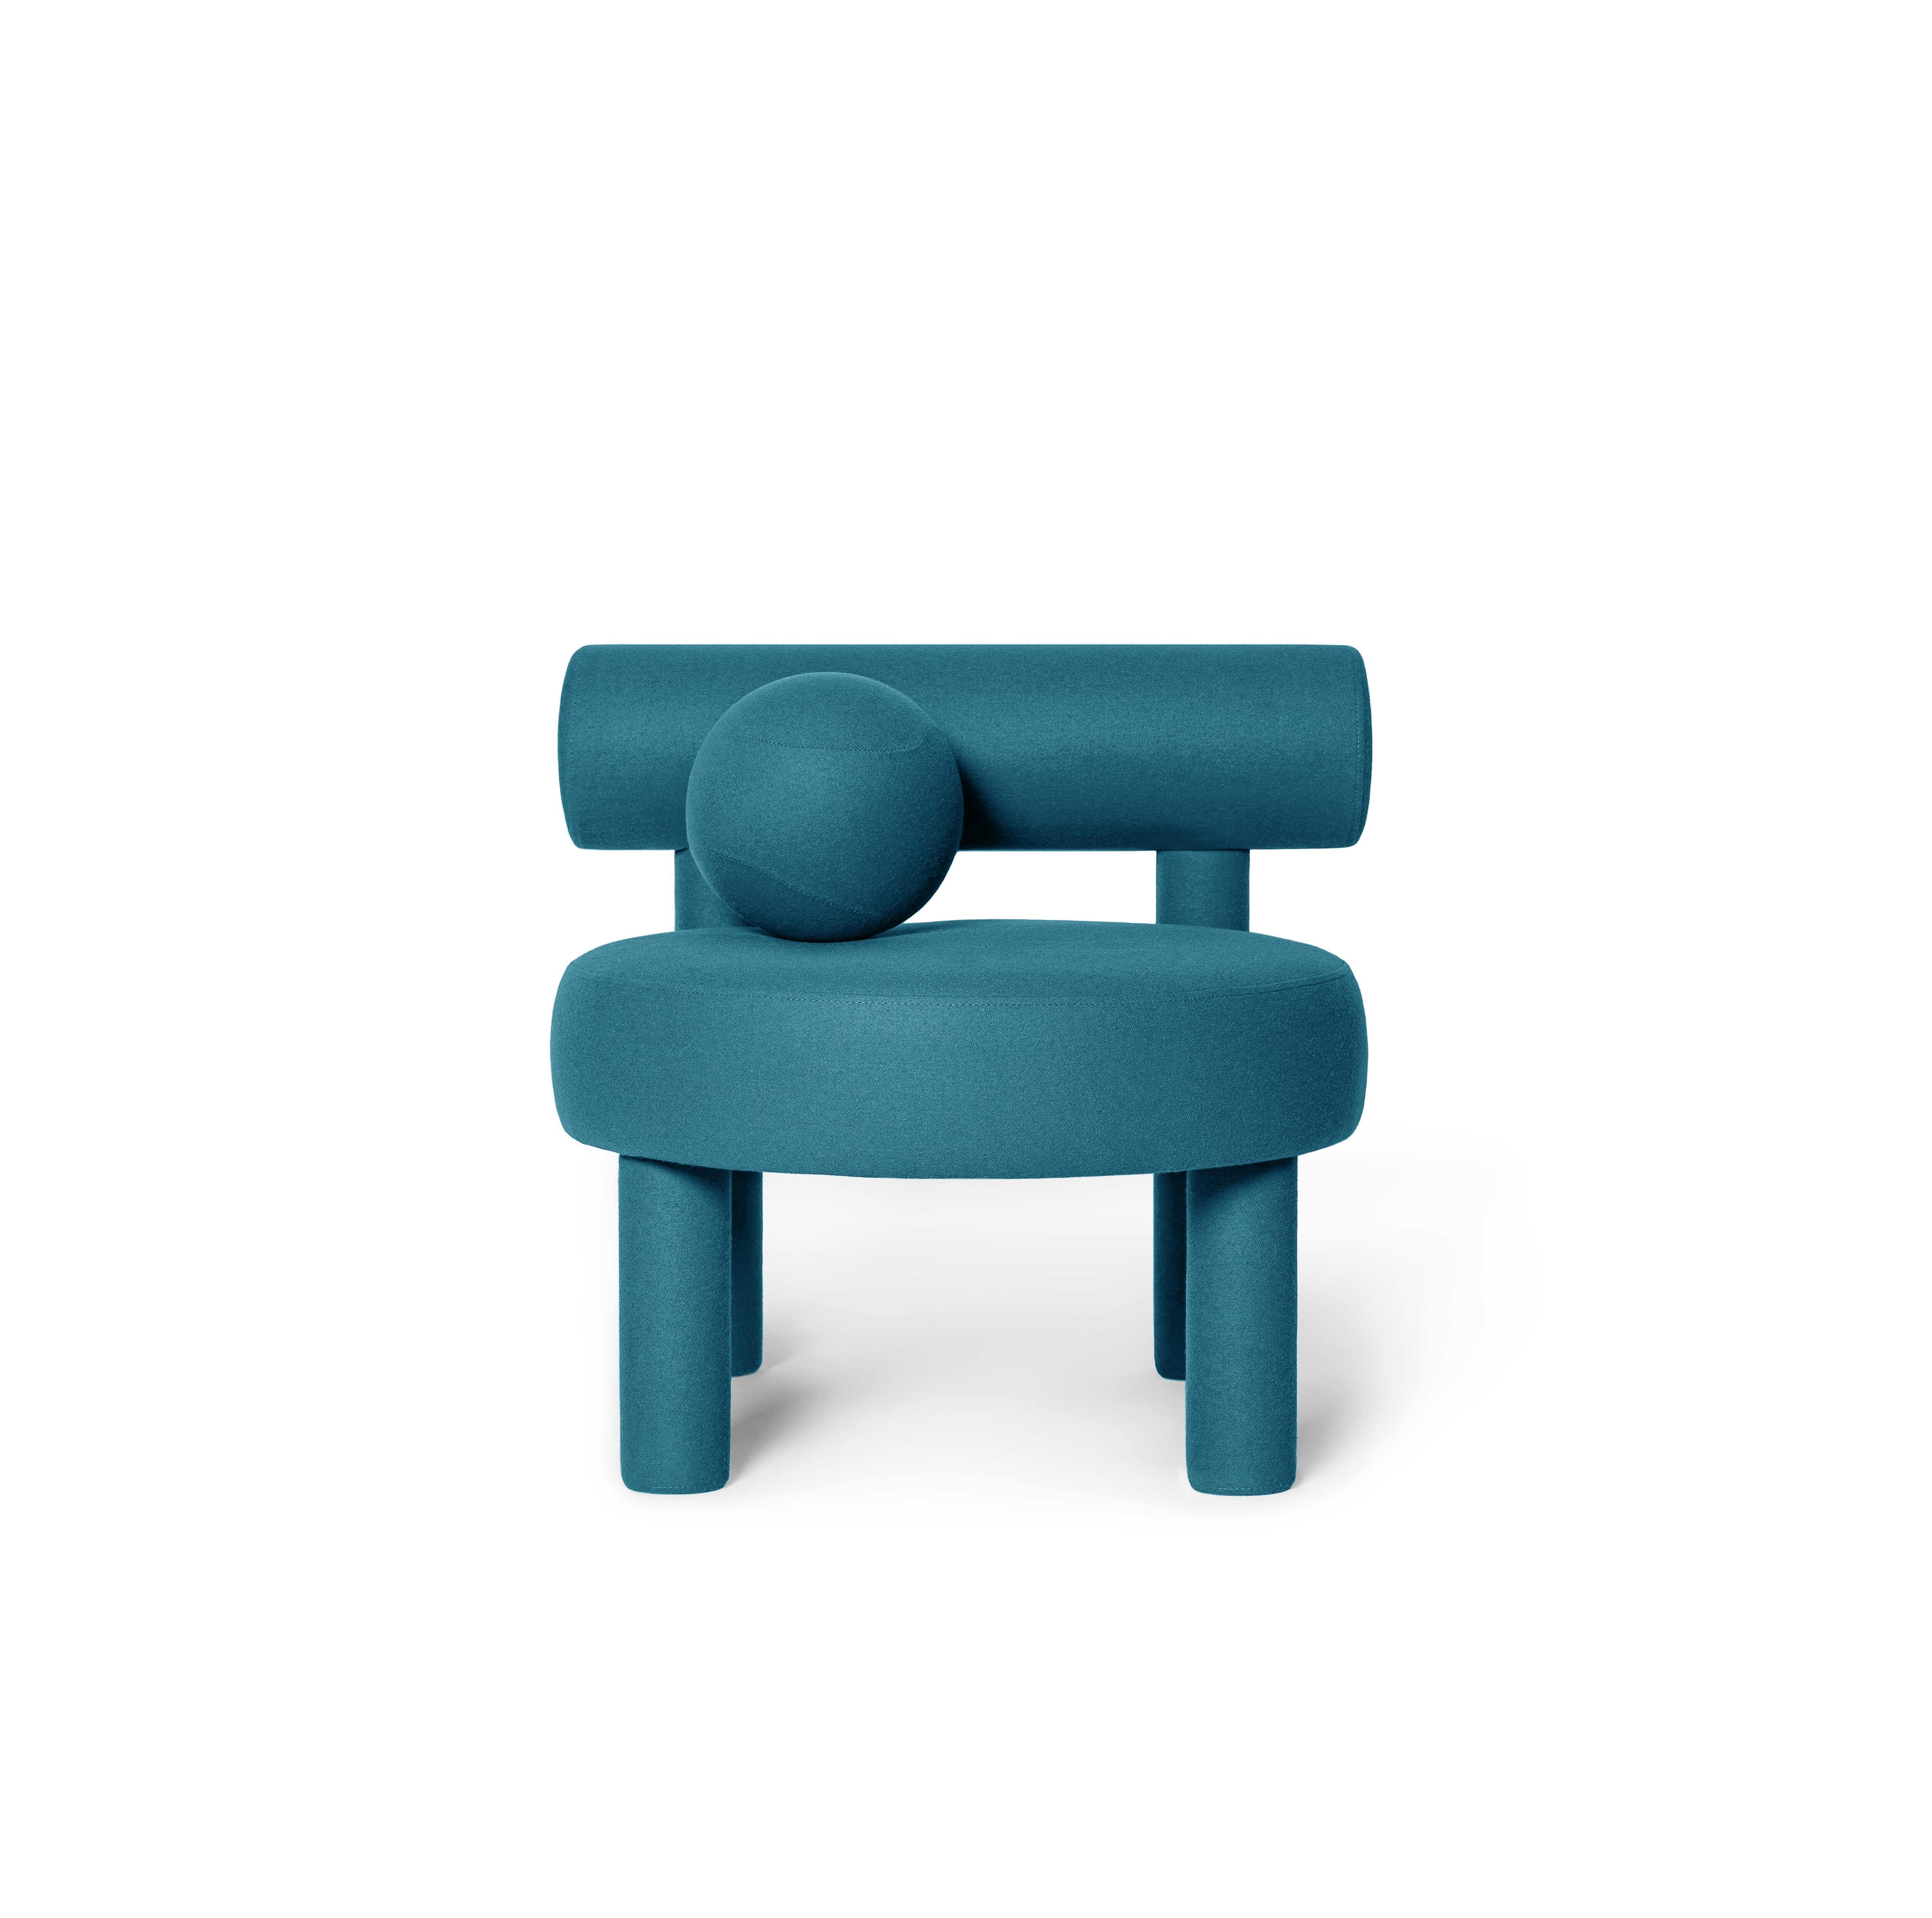 Low chair GROPIUS CS1 by Noom
Model : Category Savoy FR - Turquoize H491
Designer: Kateryna Sokolova

Dimensions:
Height: 71 cm / 27,95 in
Width: 75 cm / 29,53 in
Depth: 75 cm / 29,53 in
Seat height: 44 cm / 17,32 in

New NOOM furniture collection